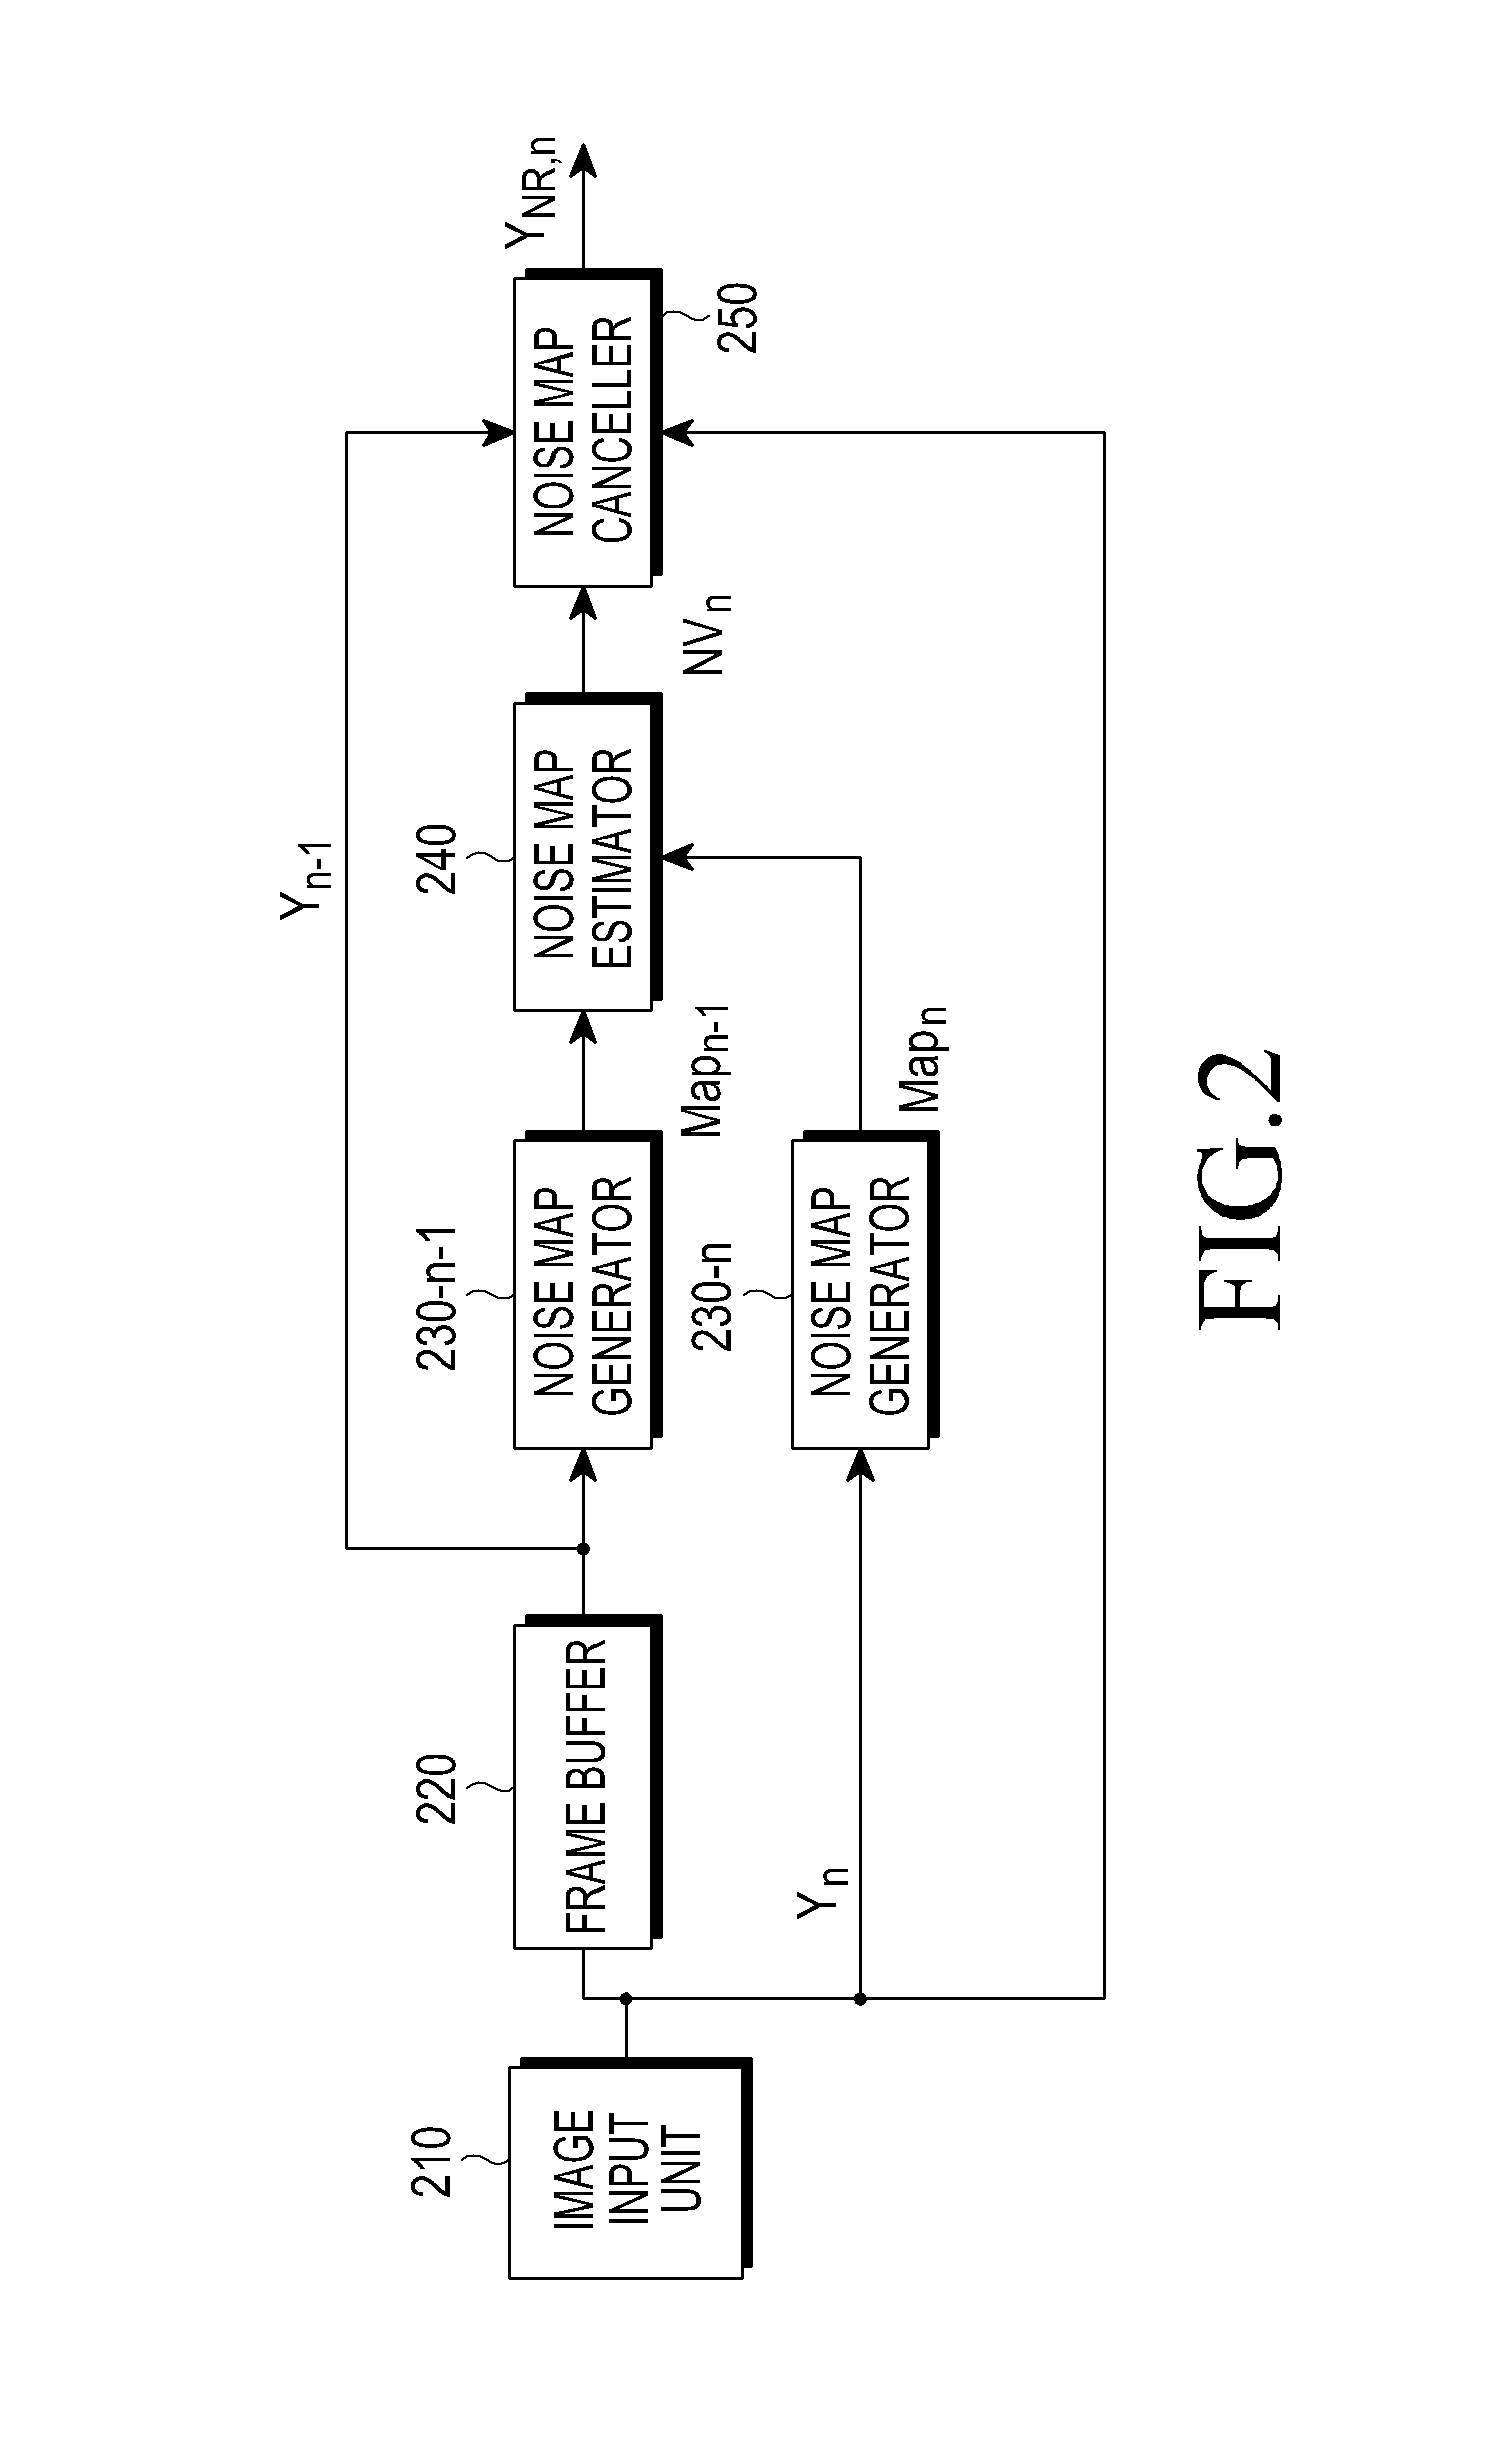 Apparatus and method for estimating noise